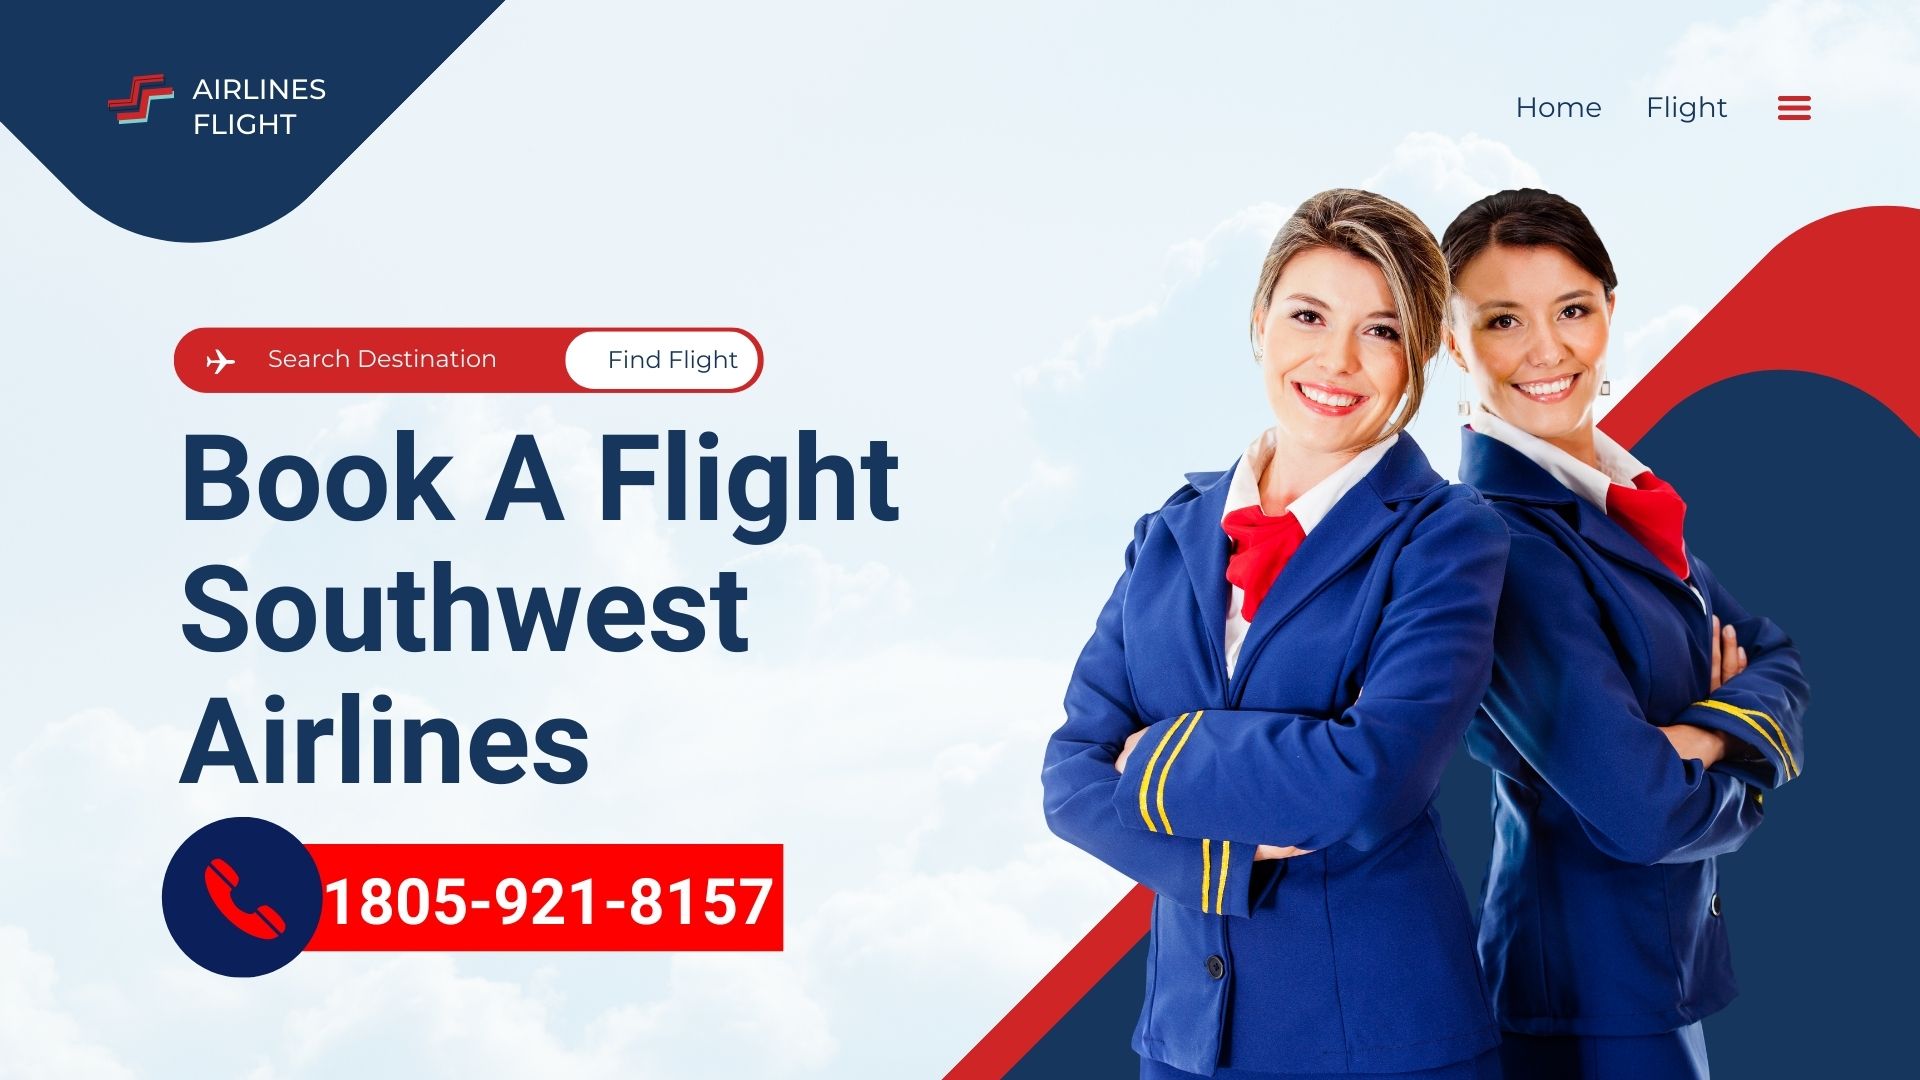 How to Book a Flight on Southwest Airlines